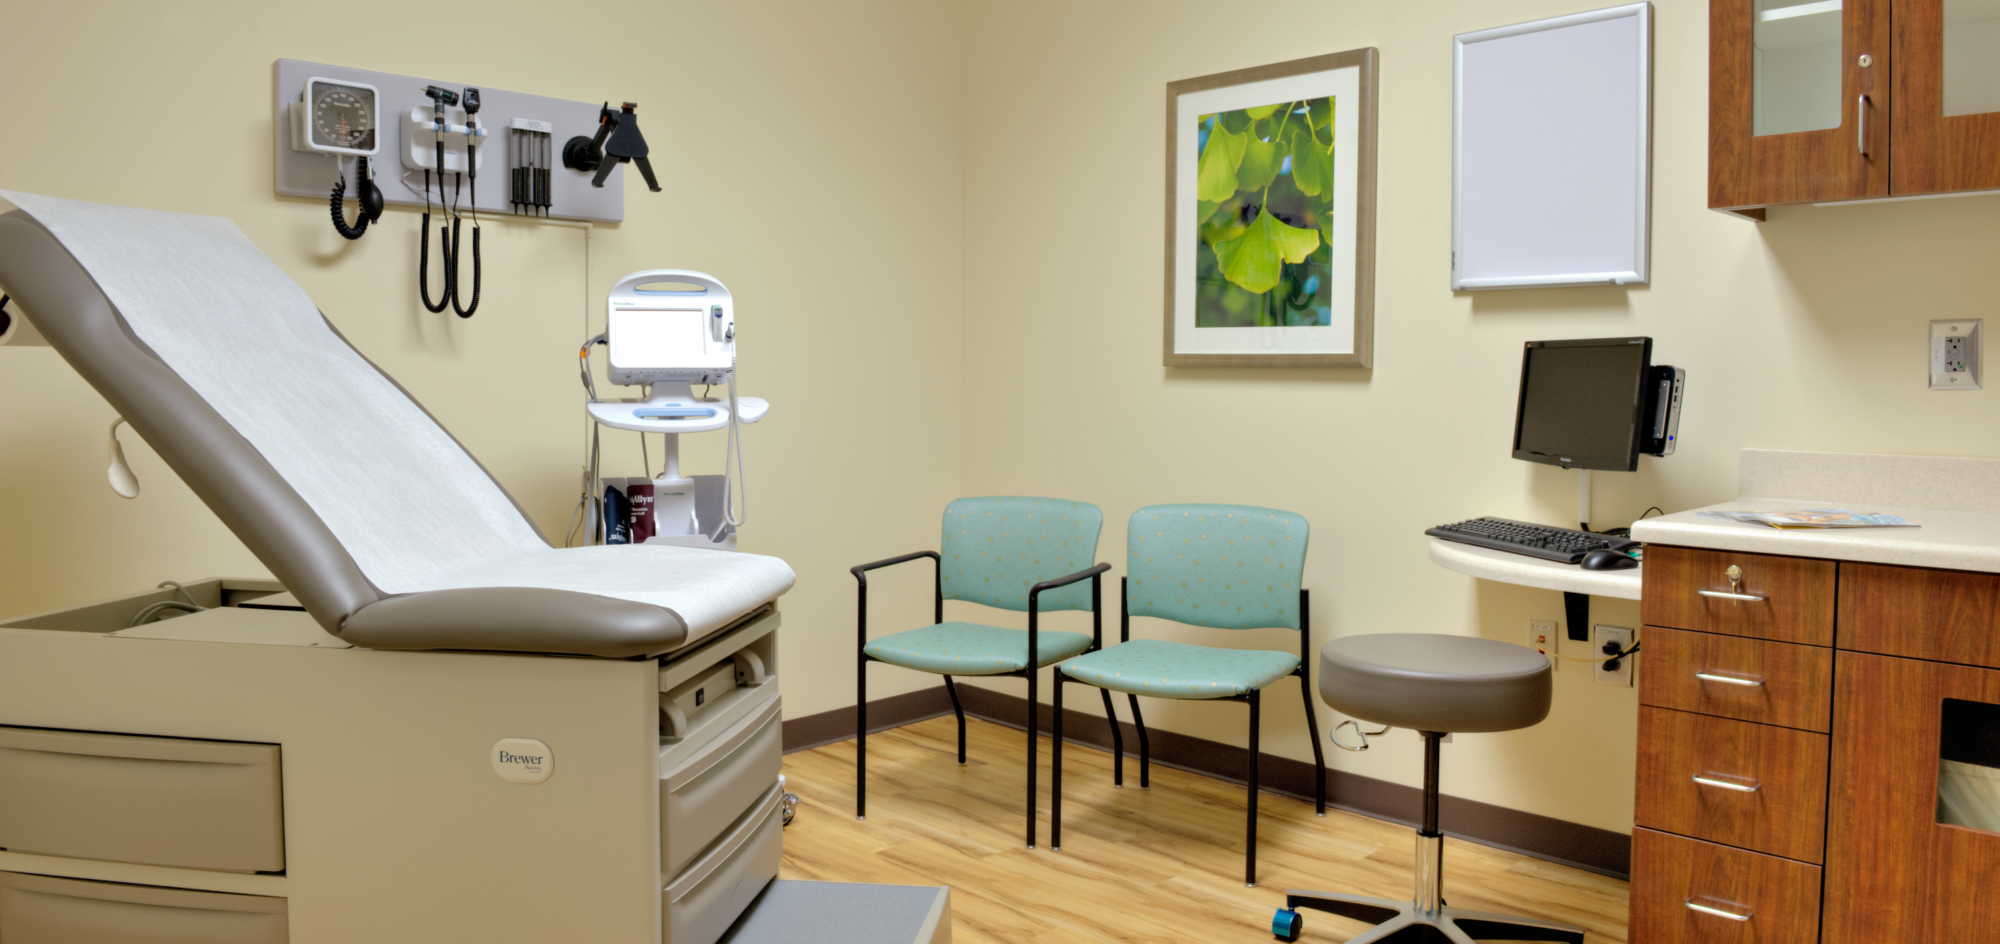 How To Make Your Exam Rooms As Germ Free As Possible Octoclean